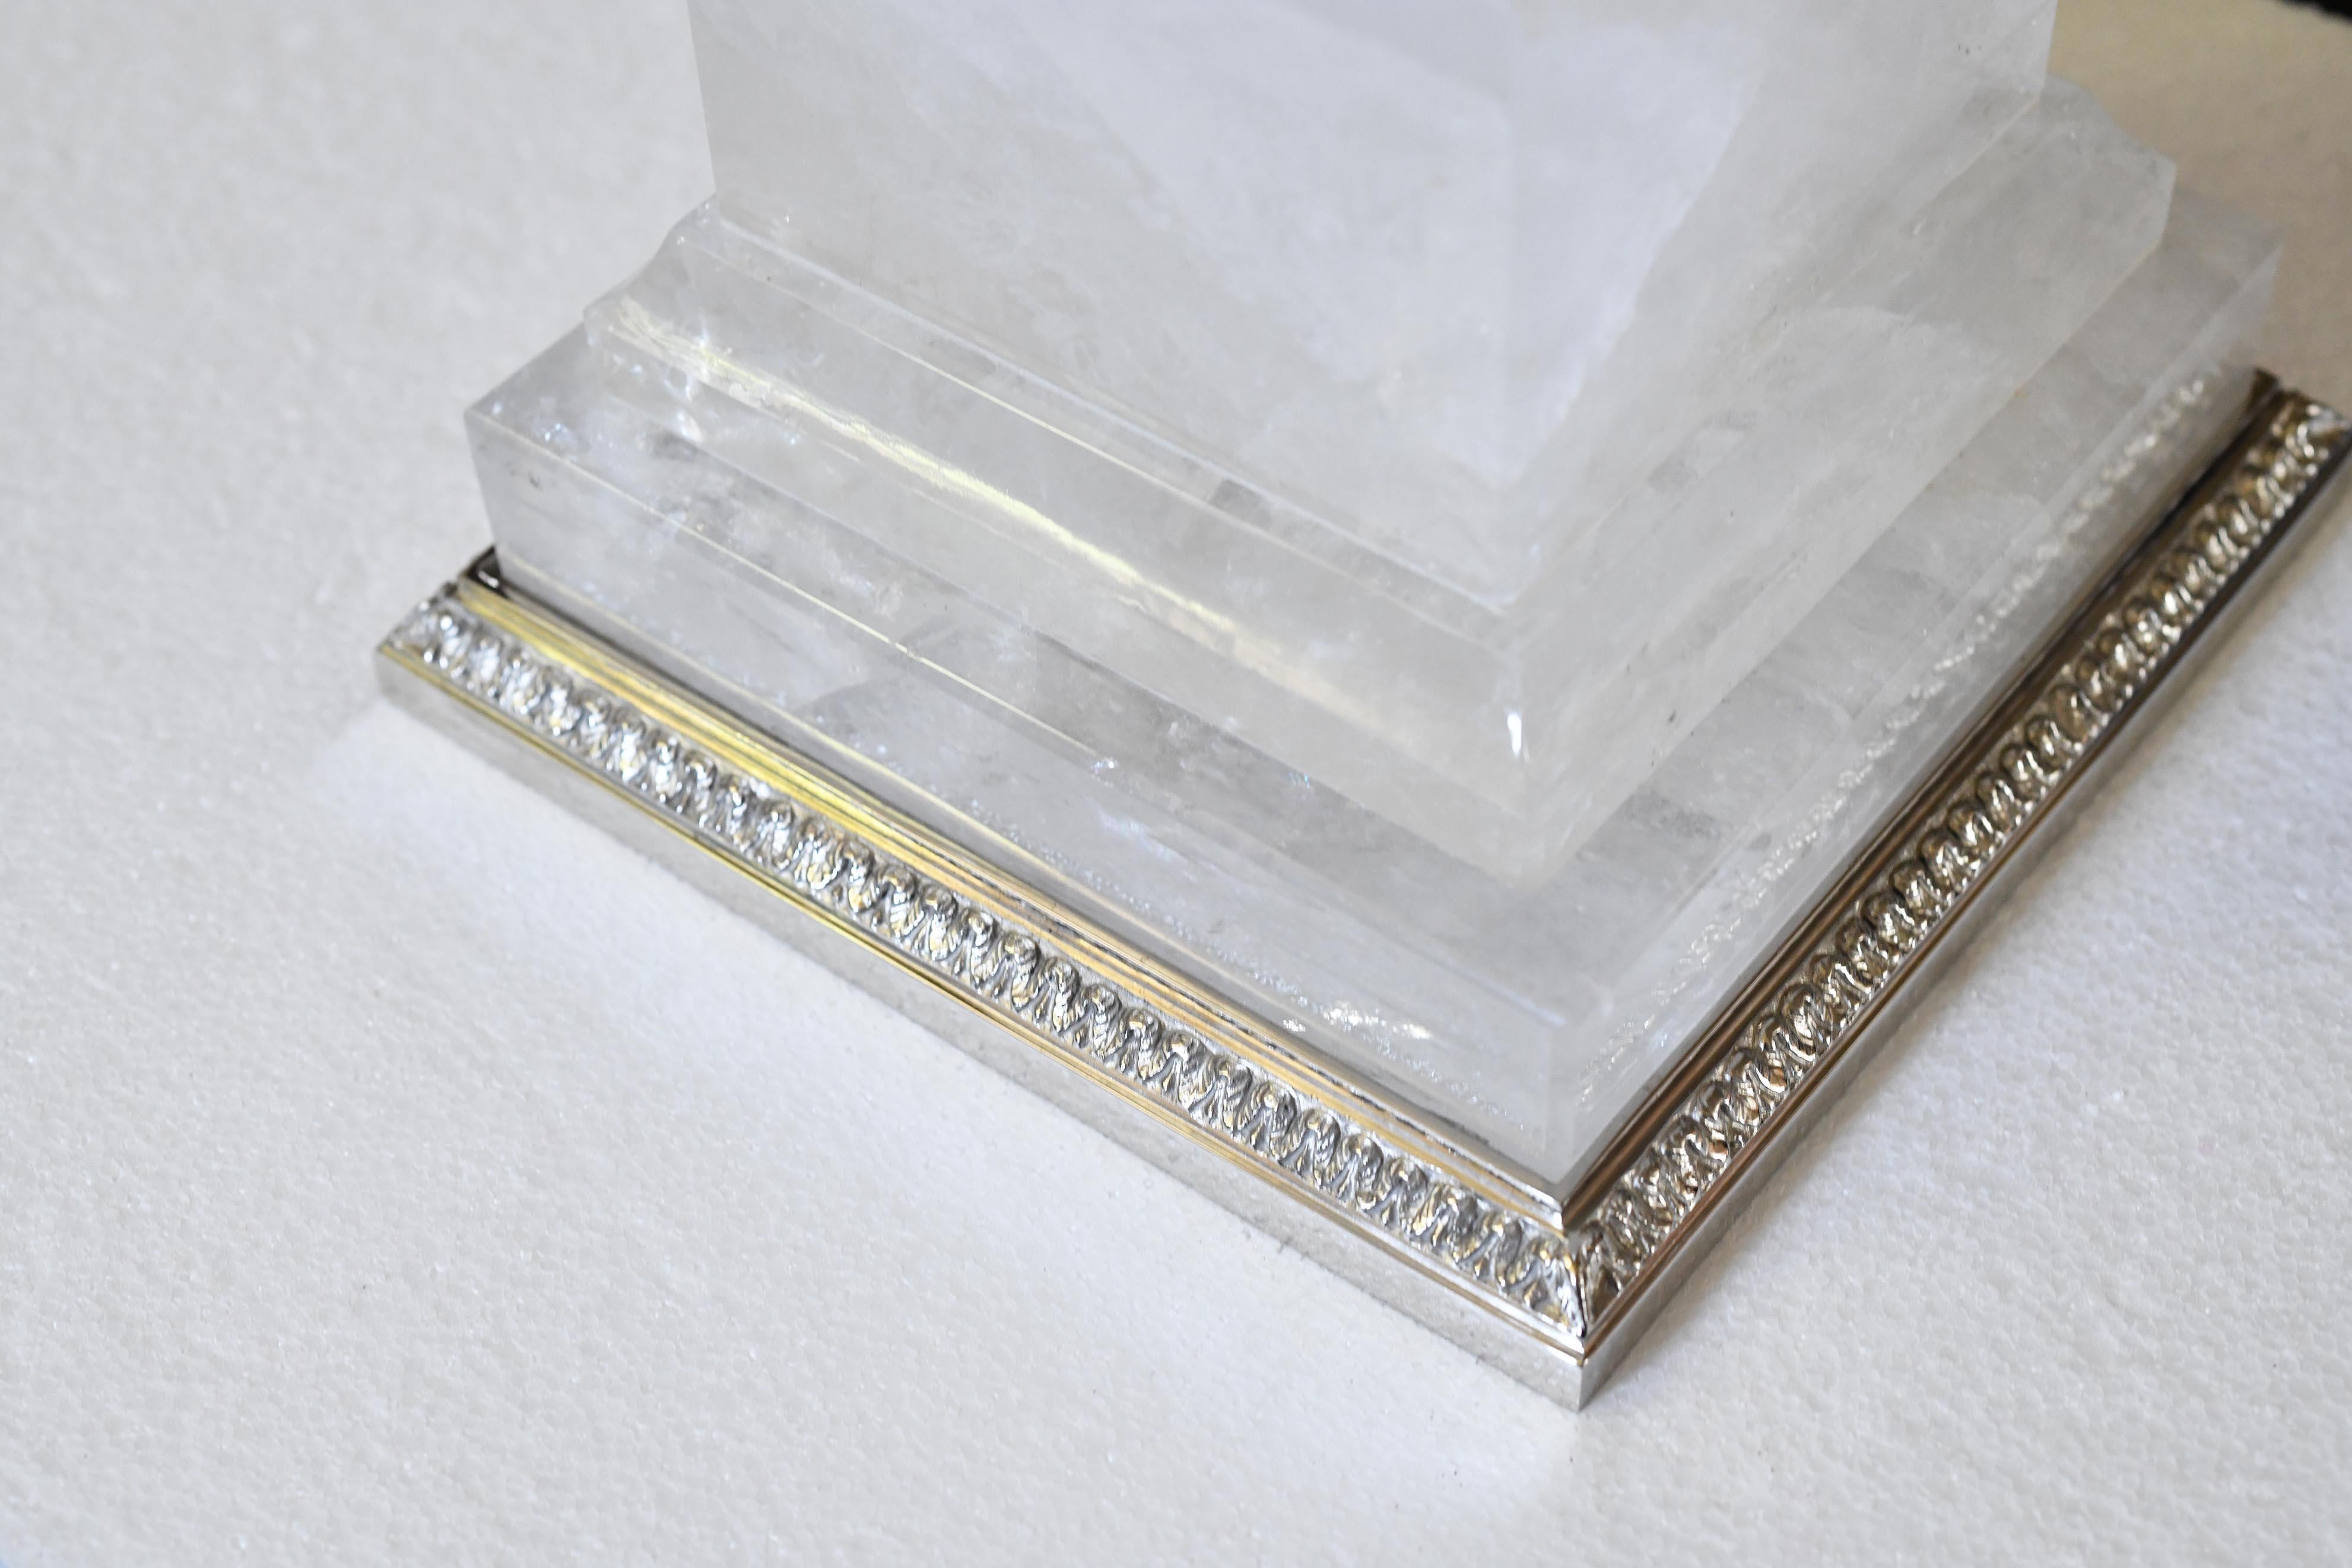 Obelisk Rock Crystal Lamps by Phoenix In Excellent Condition For Sale In New York, NY